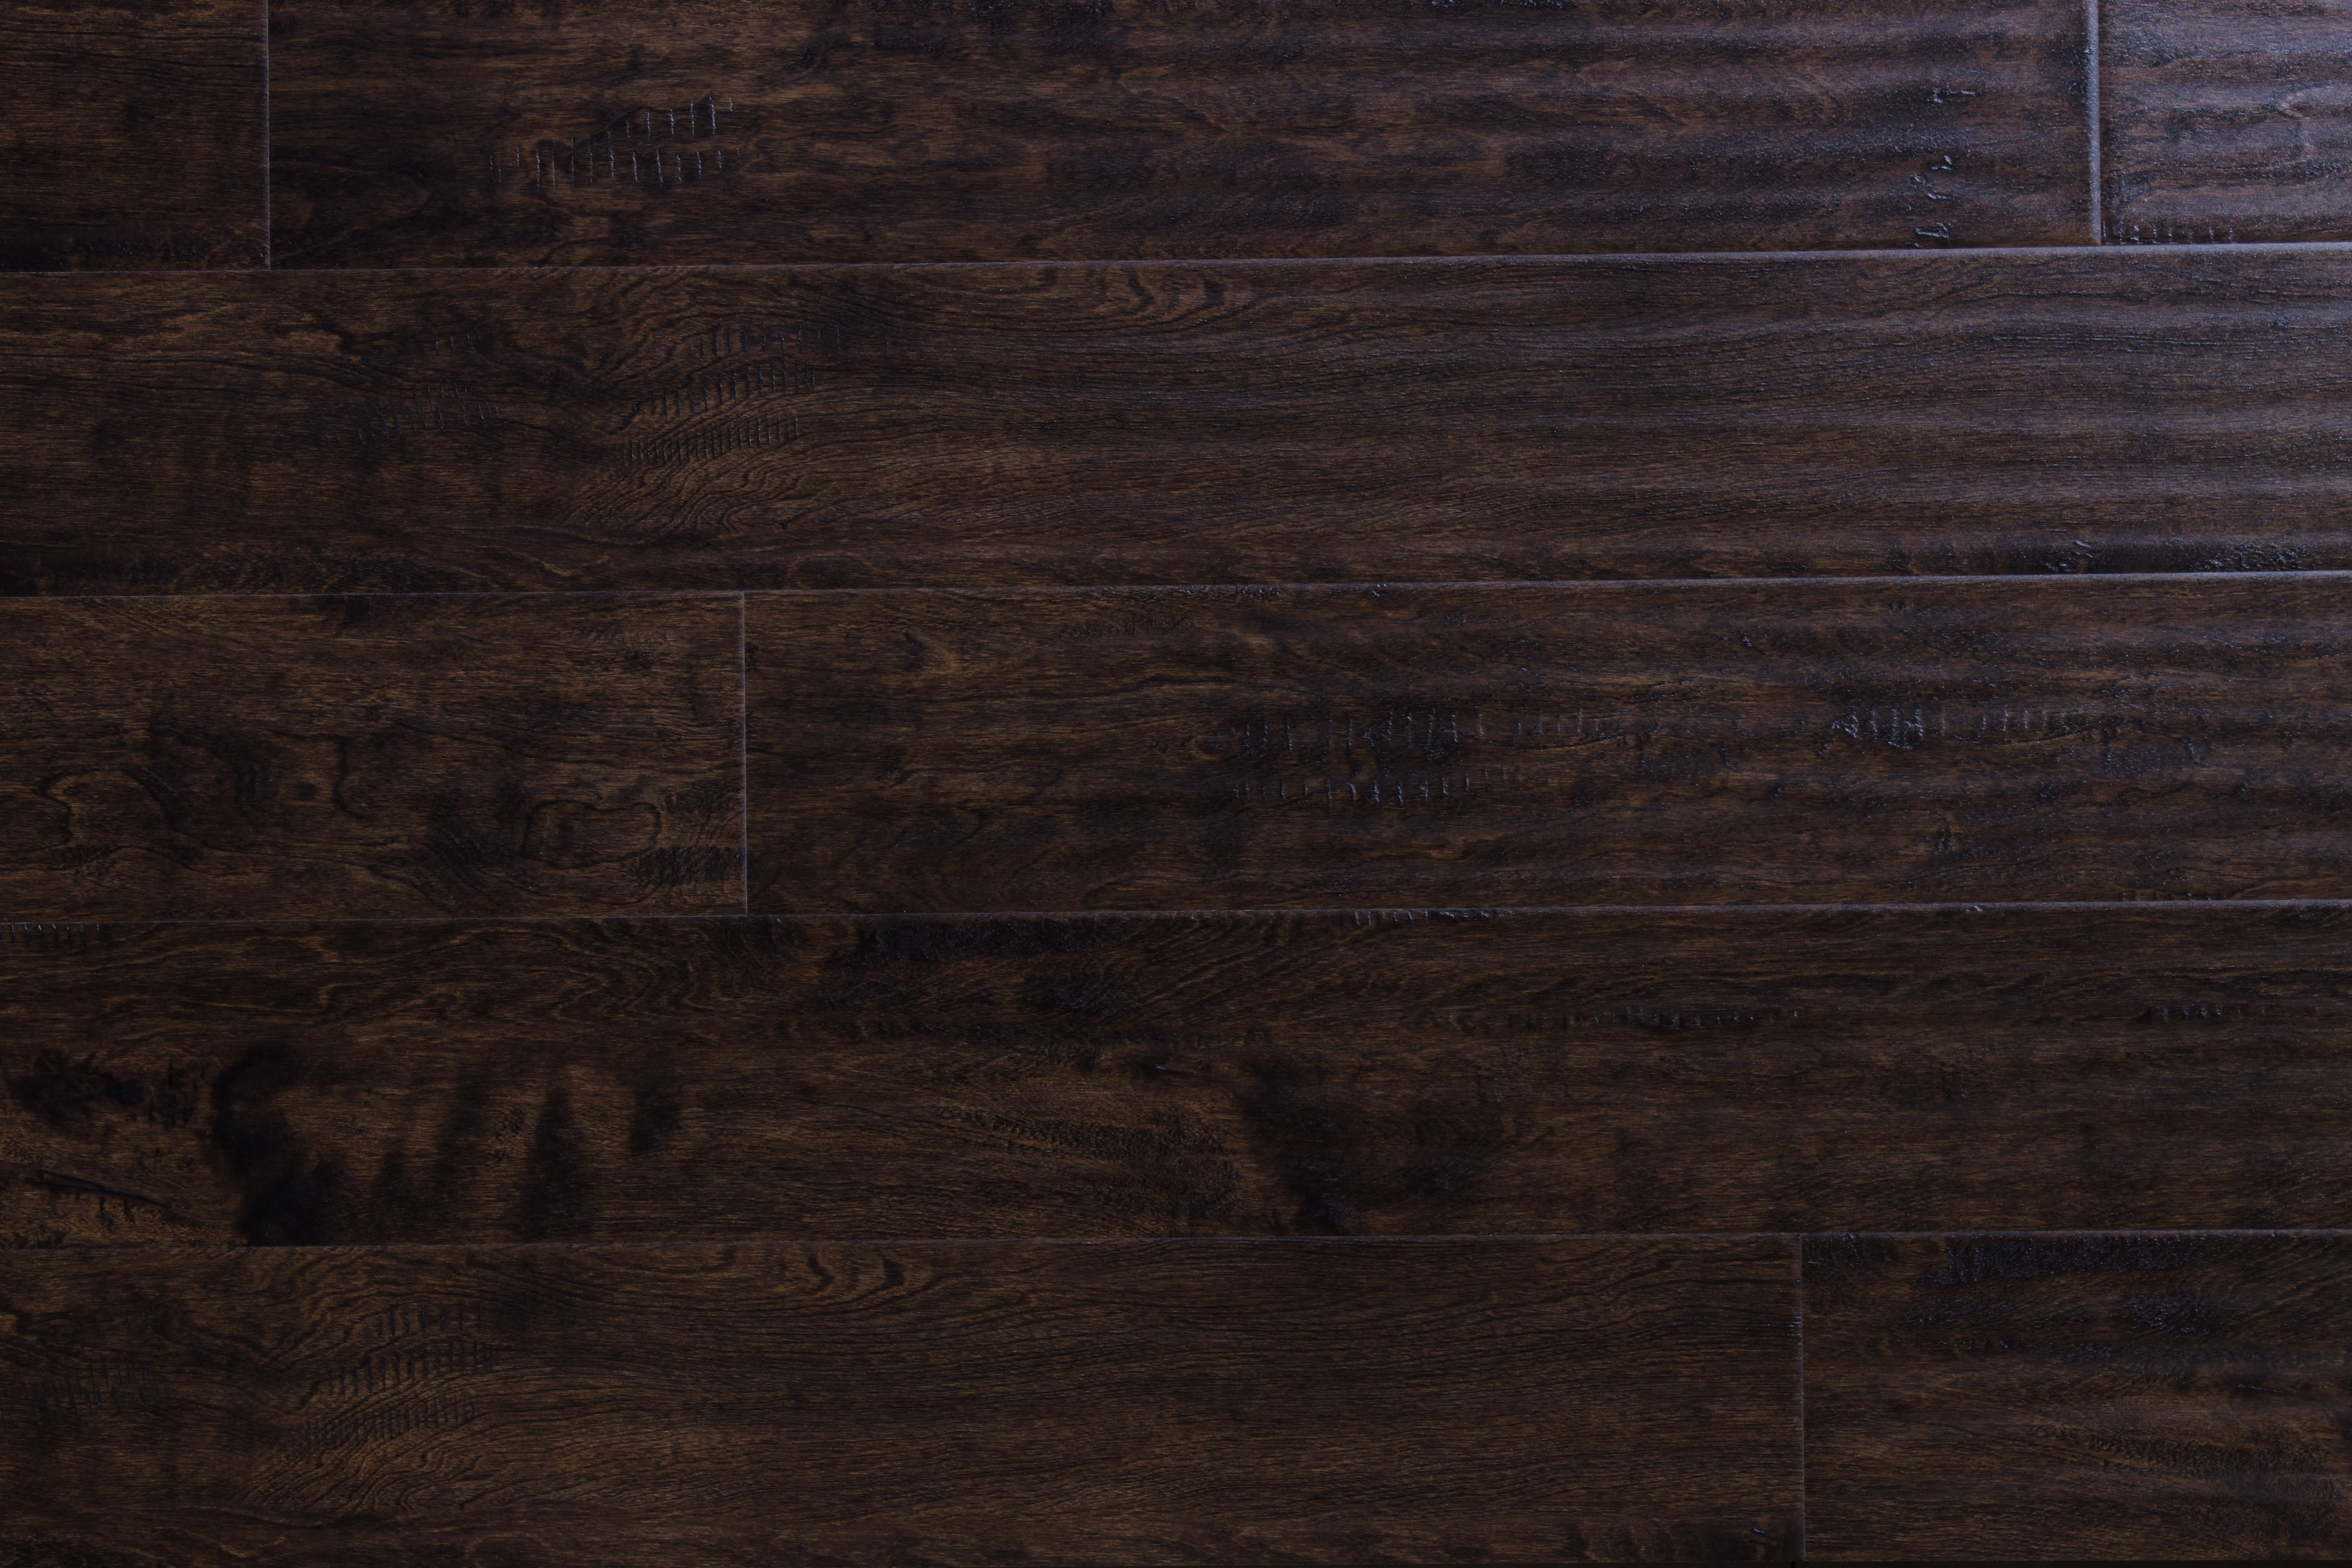 13 Popular How Much Do New Hardwood Floors Cost 2024 free download how much do new hardwood floors cost of wood flooring free samples available at builddirecta in tailor multi gb 5874277bb8d3c